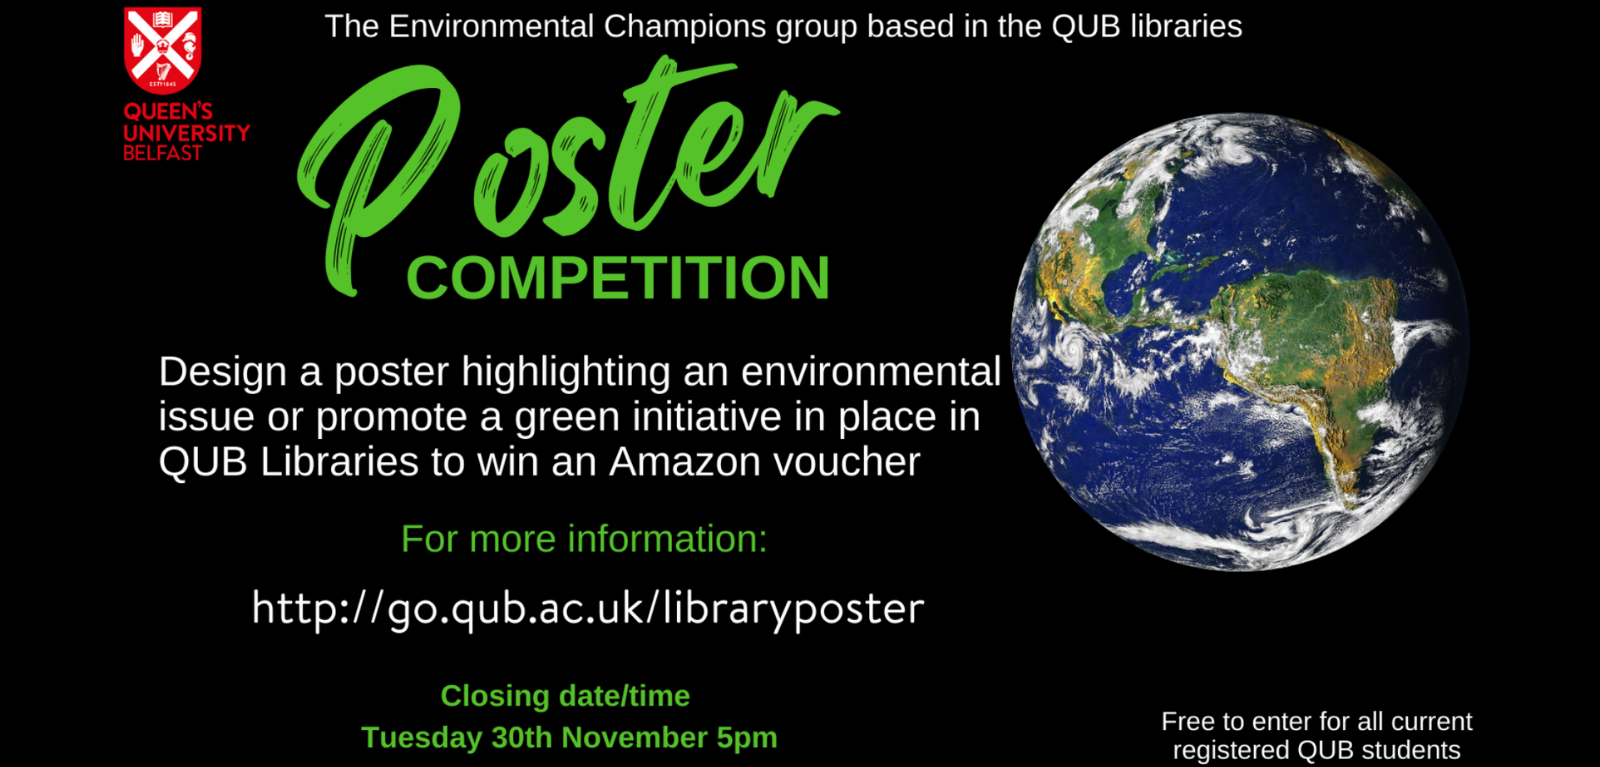 IS Environmental Champions Poster Competition